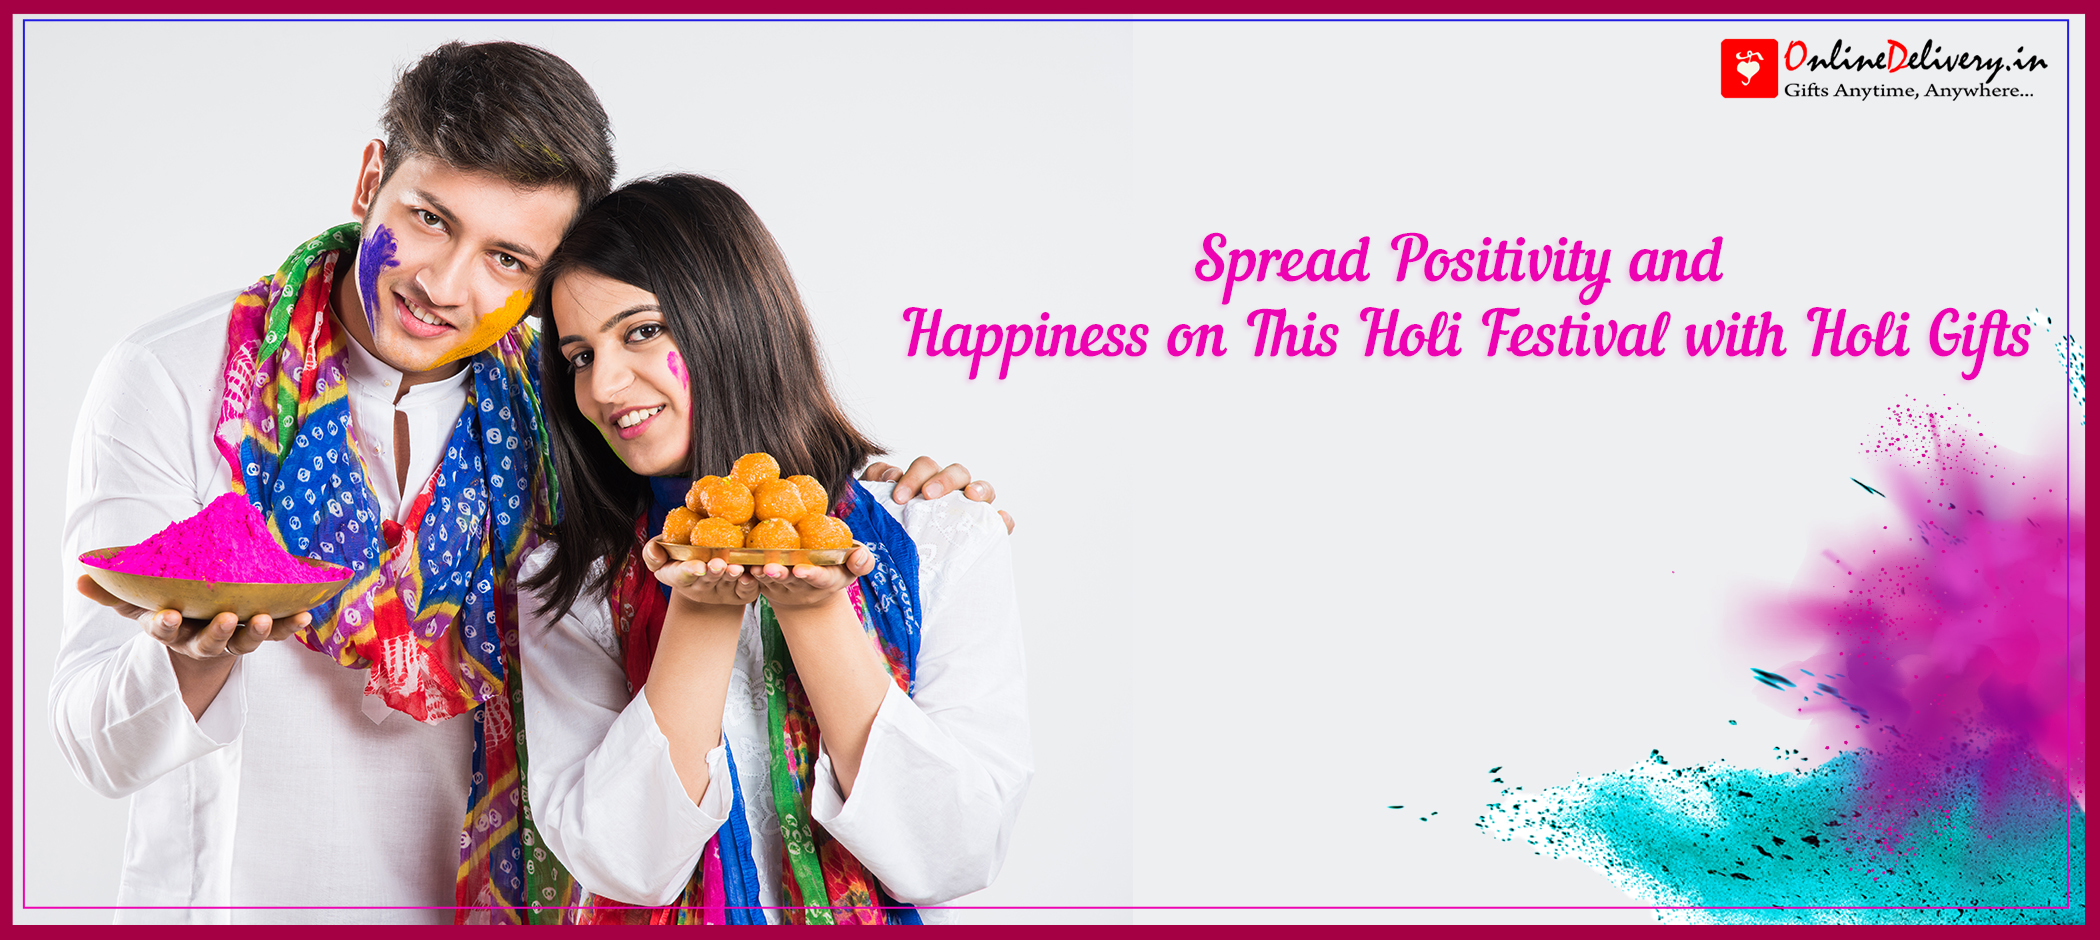 Spread Positivity and Happiness on This Holi Festival with Holi Gifts